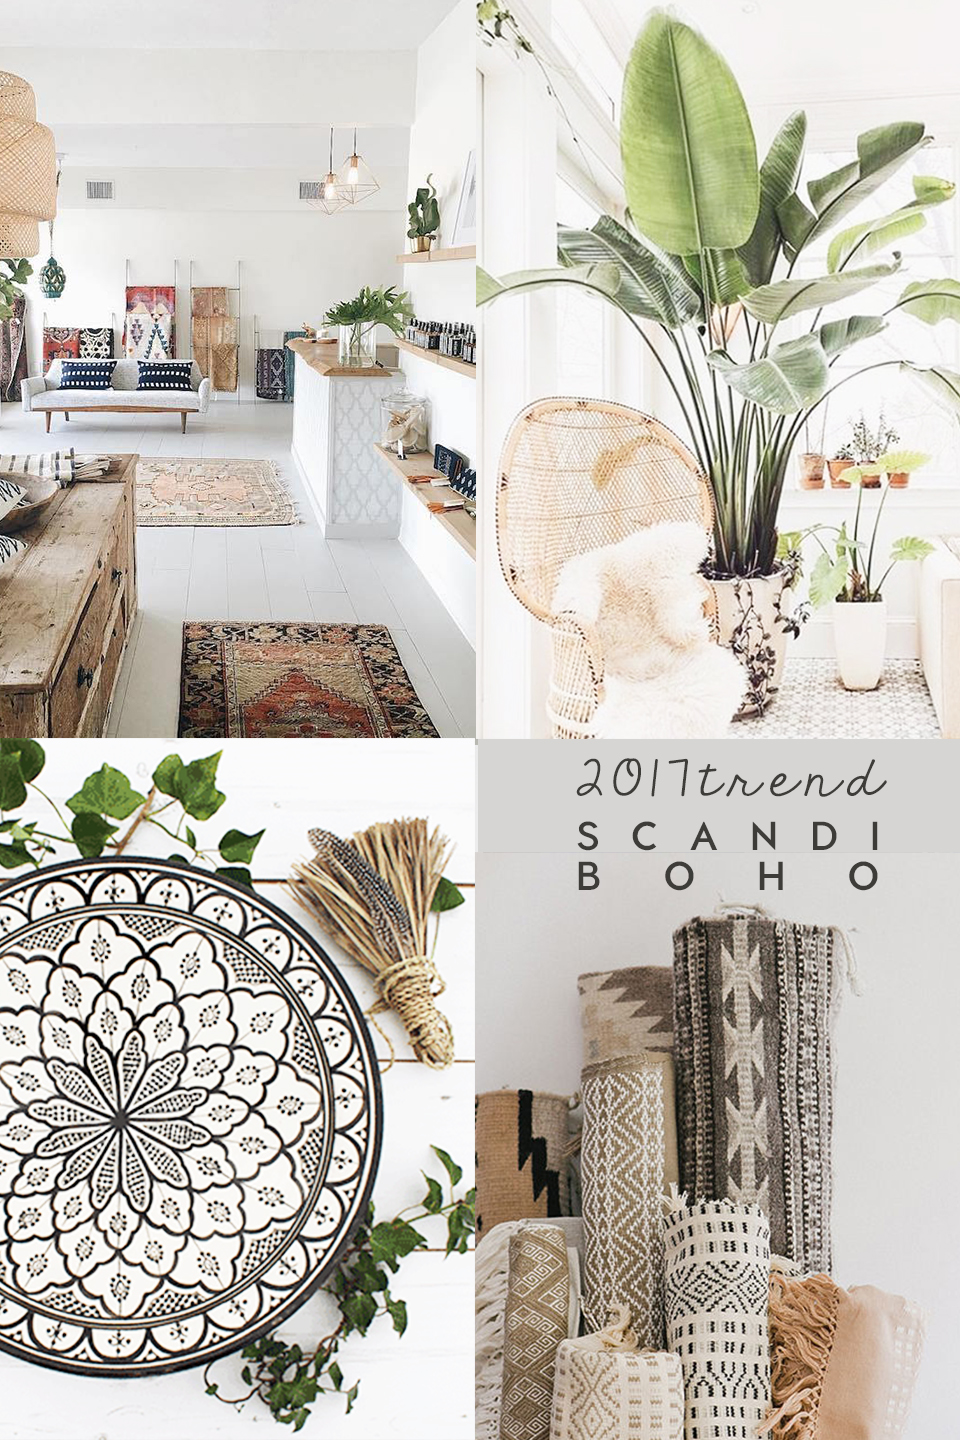 Interior Trends Scandi Boho Style Is The Trendiest Of 2017